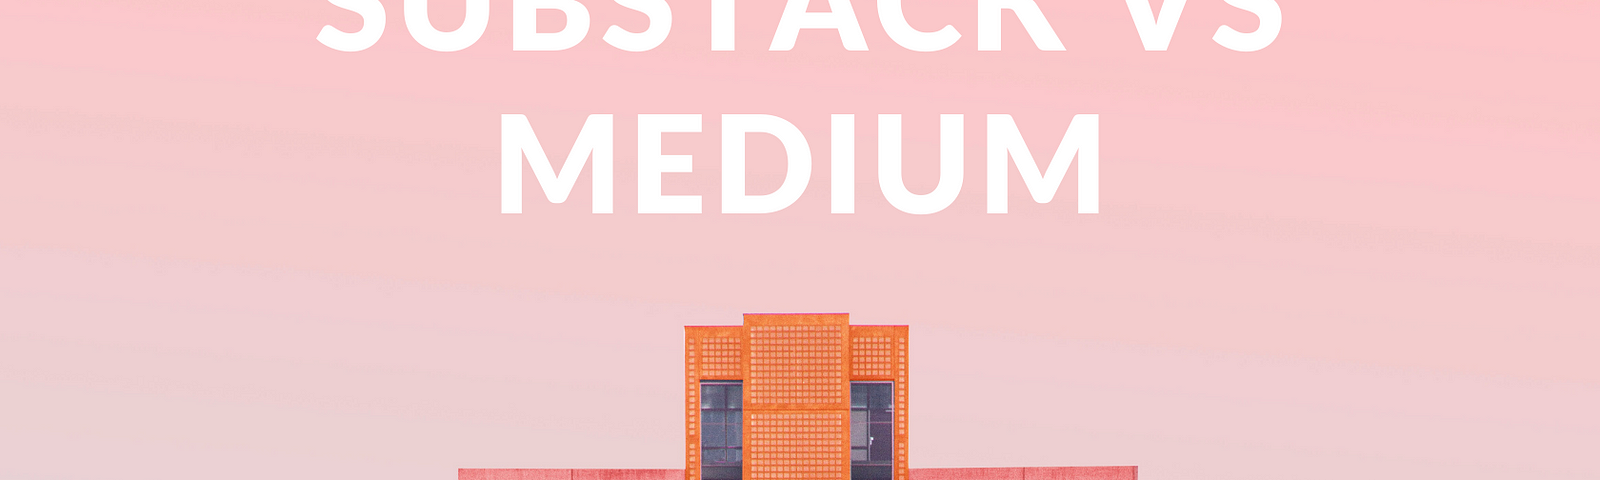 substack vs medium, medium vs substack, substack vs mailchimp, substack review, substack pricing, is substack free, substack